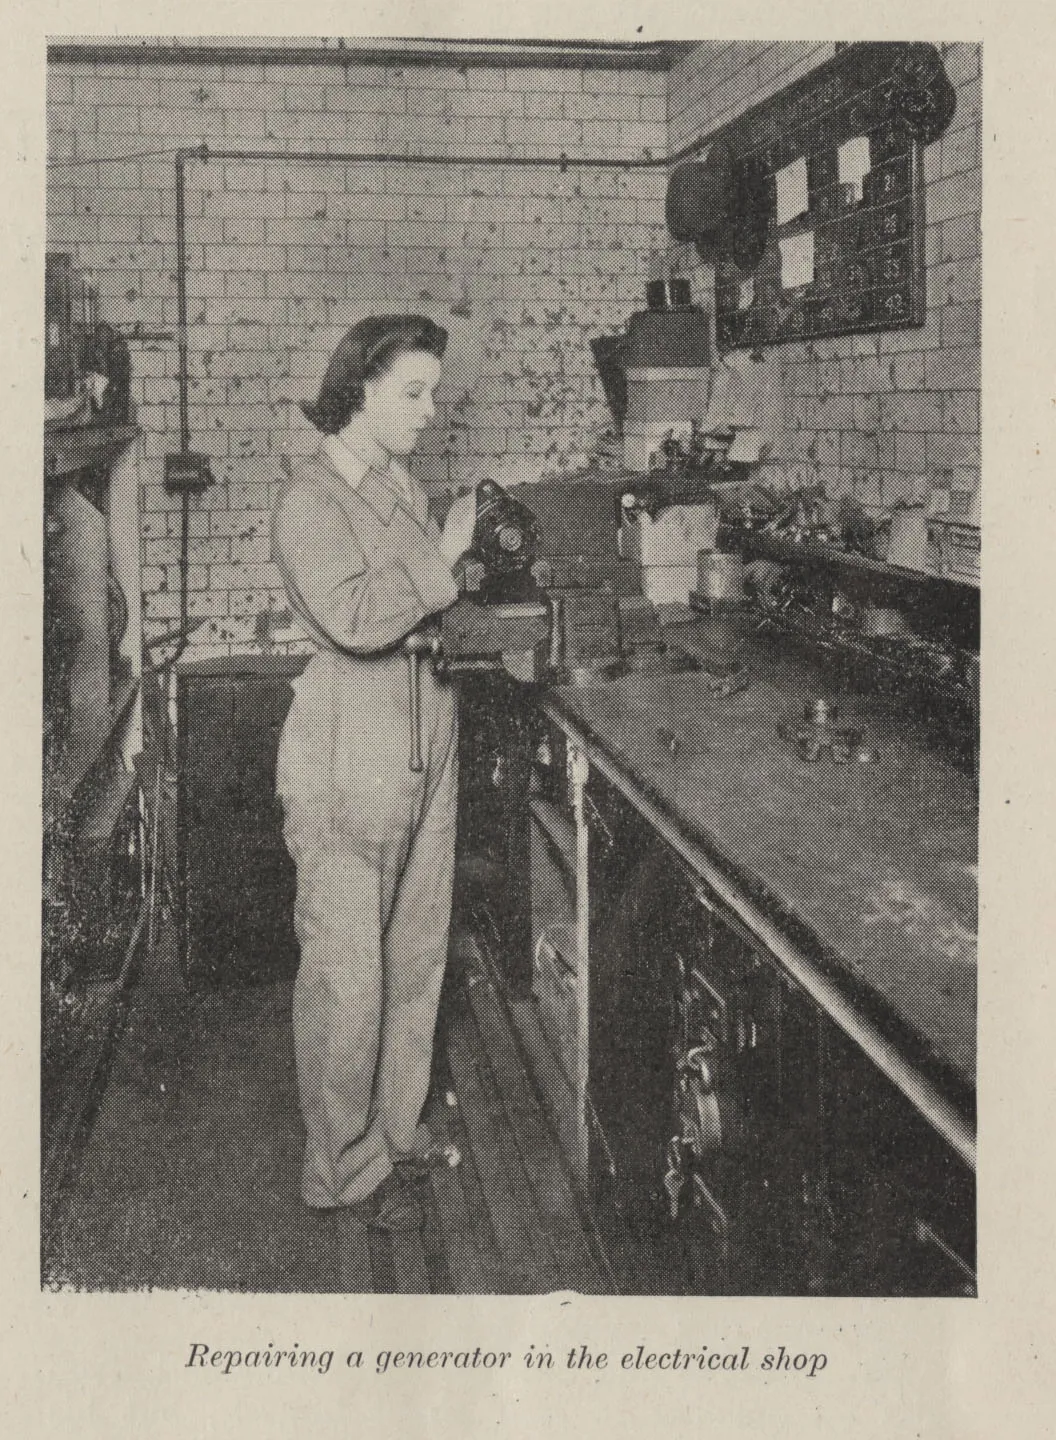 ‘Repairing a generator in the electrical shop’ The Woman Engineer Journal Vol 5 no 11